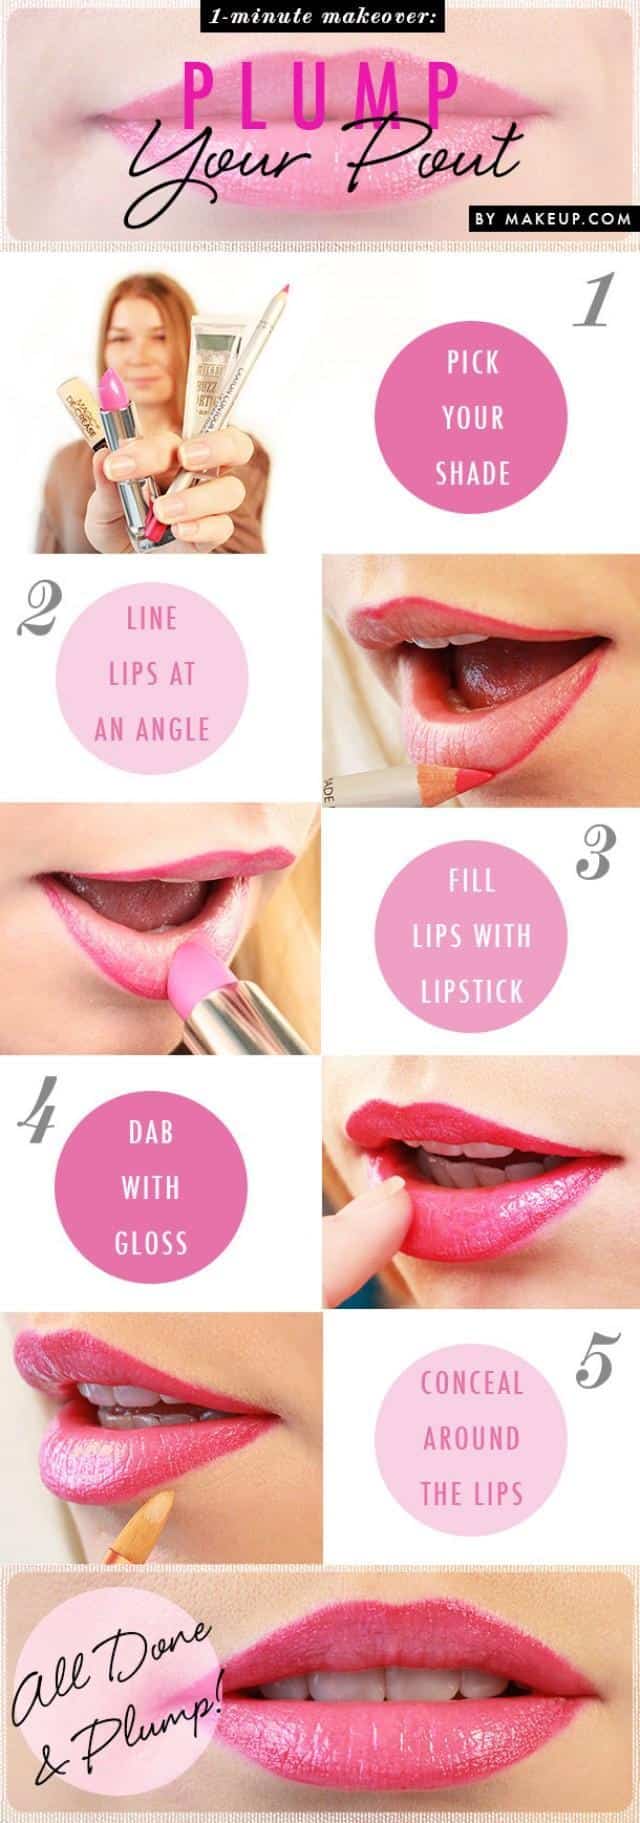 Tricks And Hacks To Make Your Lips Look Fuller And Bigger